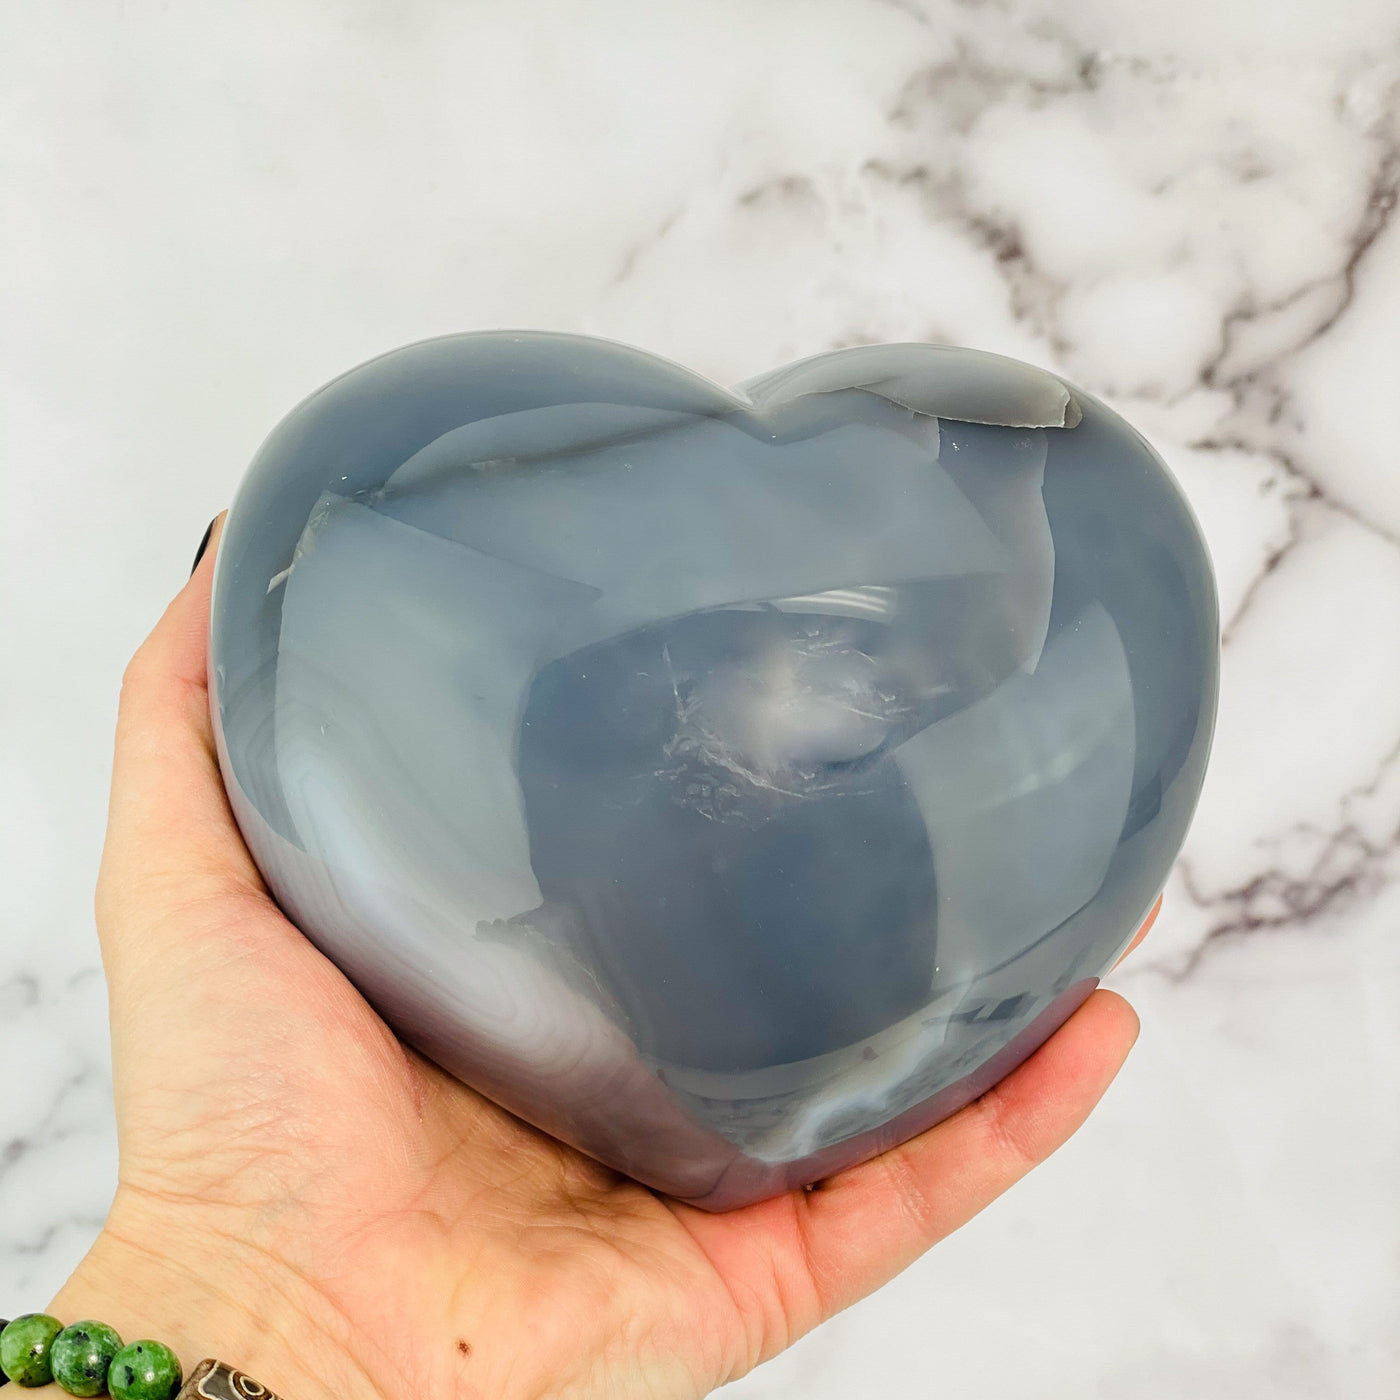 Backside of agate heart in a hand showing the polished external surface.